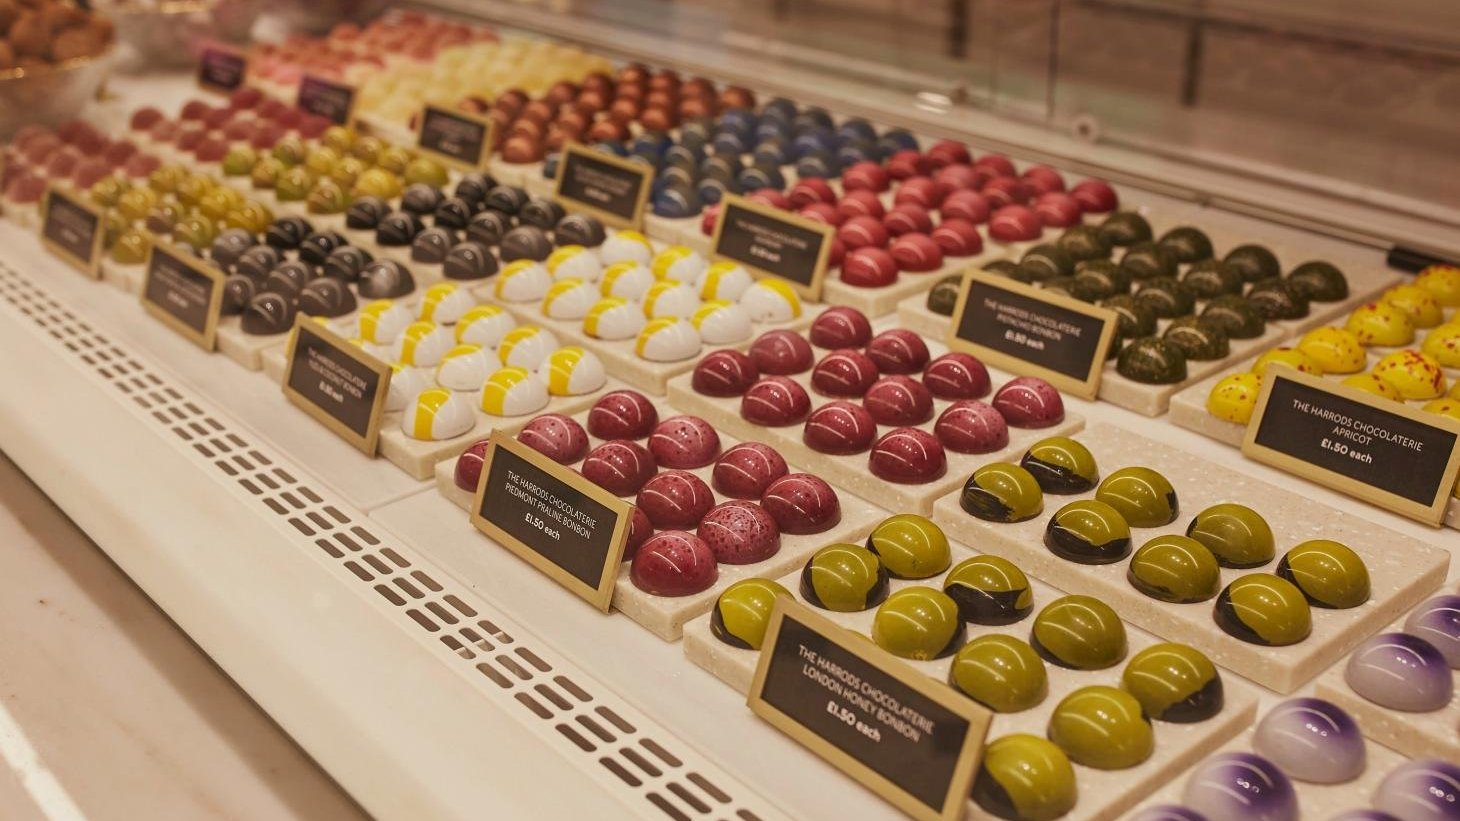 London’s most decadent chocolate shops